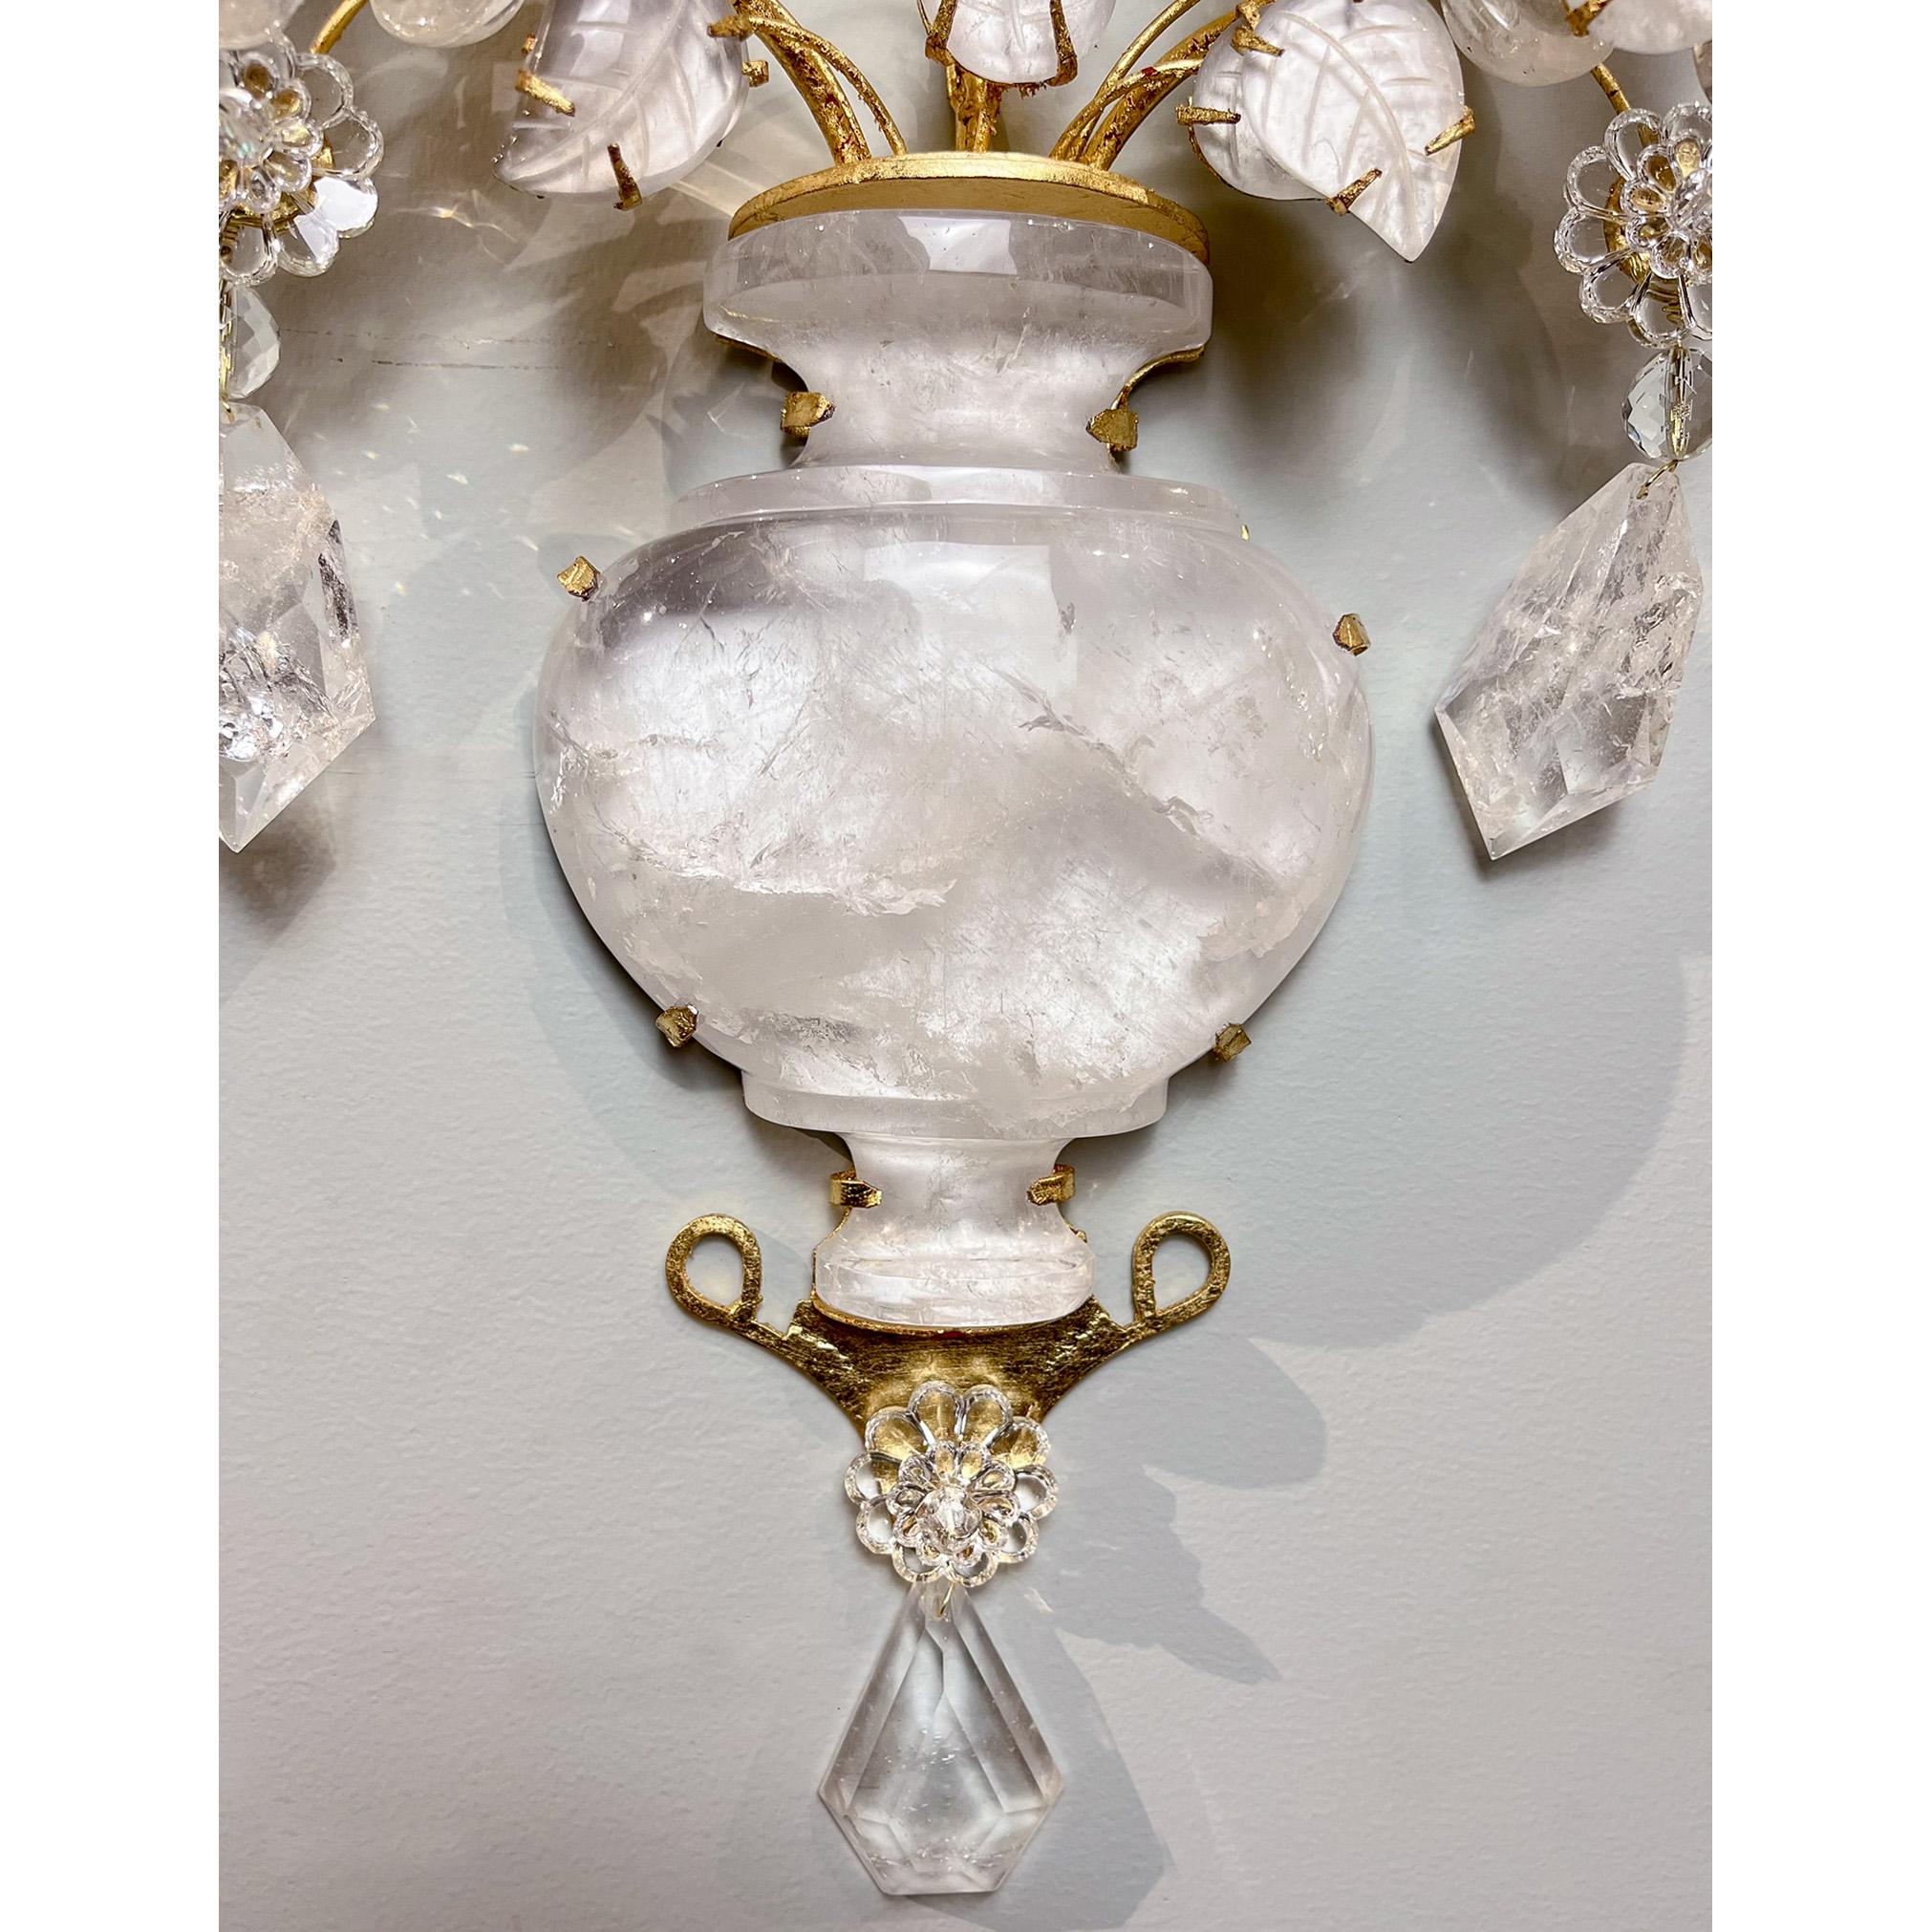 Rock crystal sconce in the style of a vase full of flowers and foliage. The large bellied vase contains crystal foliage and four large rock crystal flowers. Leaf details are etched into the crystal while flowers are formed by individual cut rock